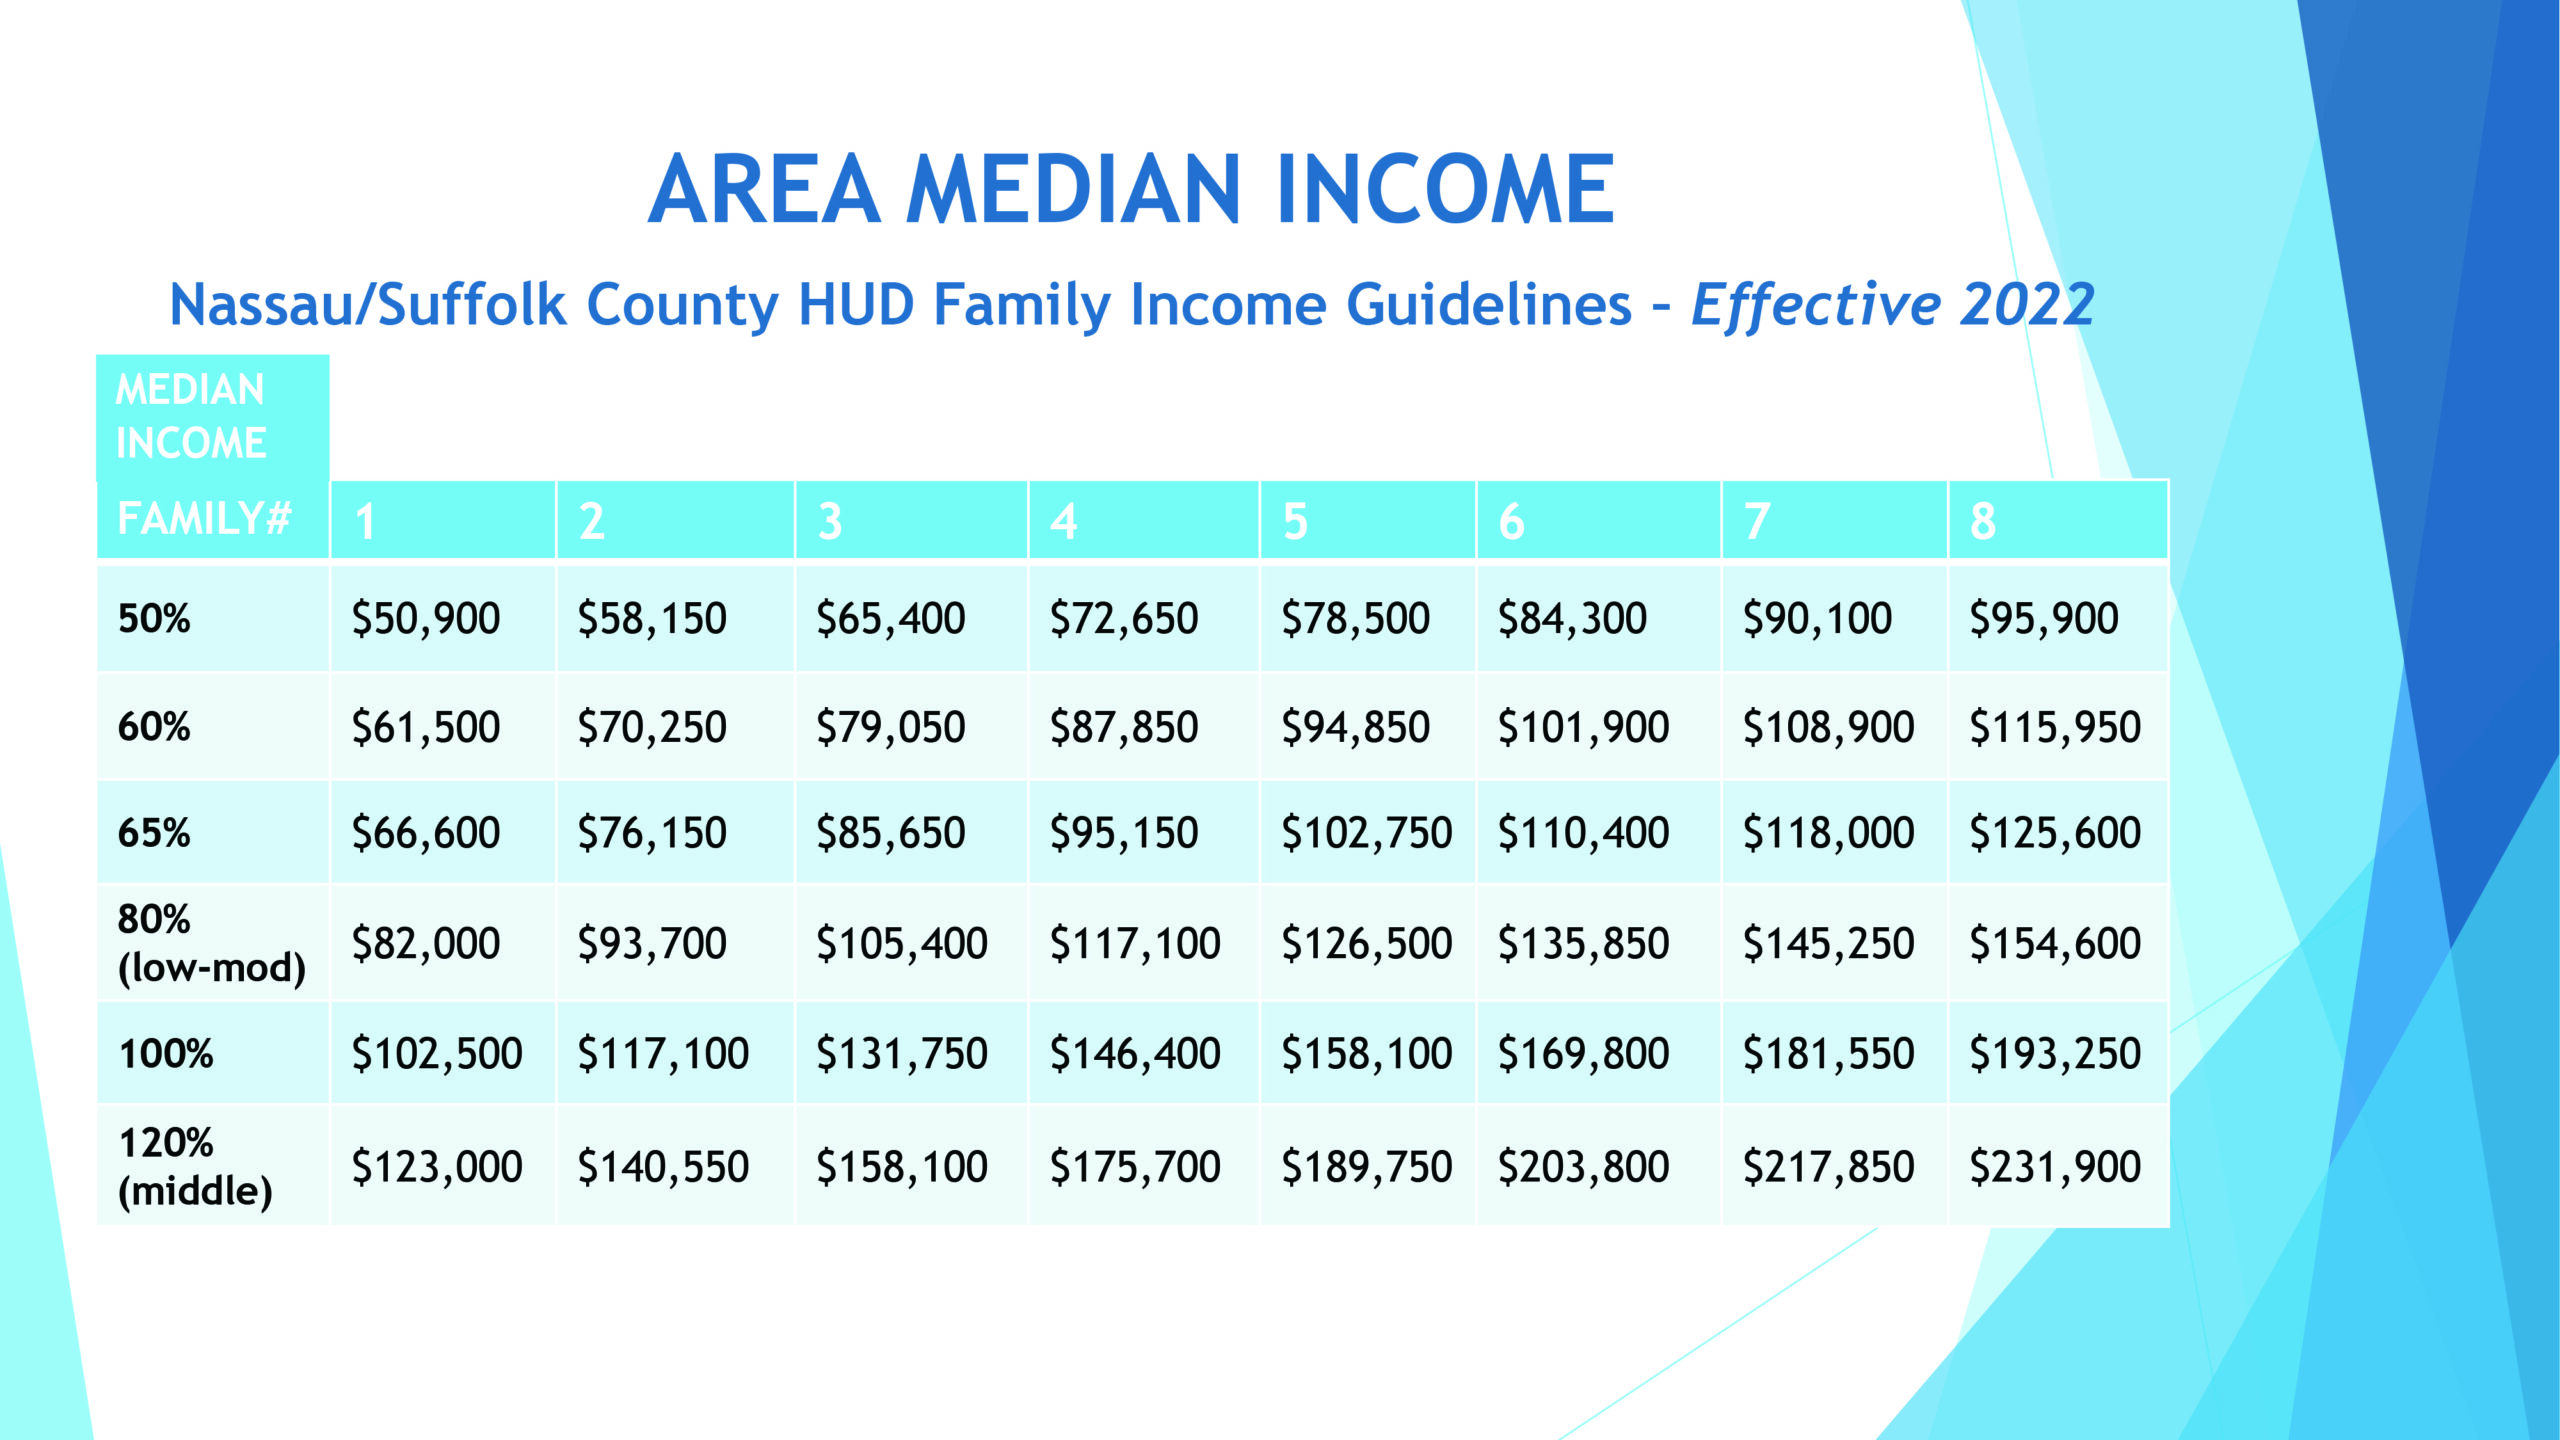 Median income levels were recently updated.